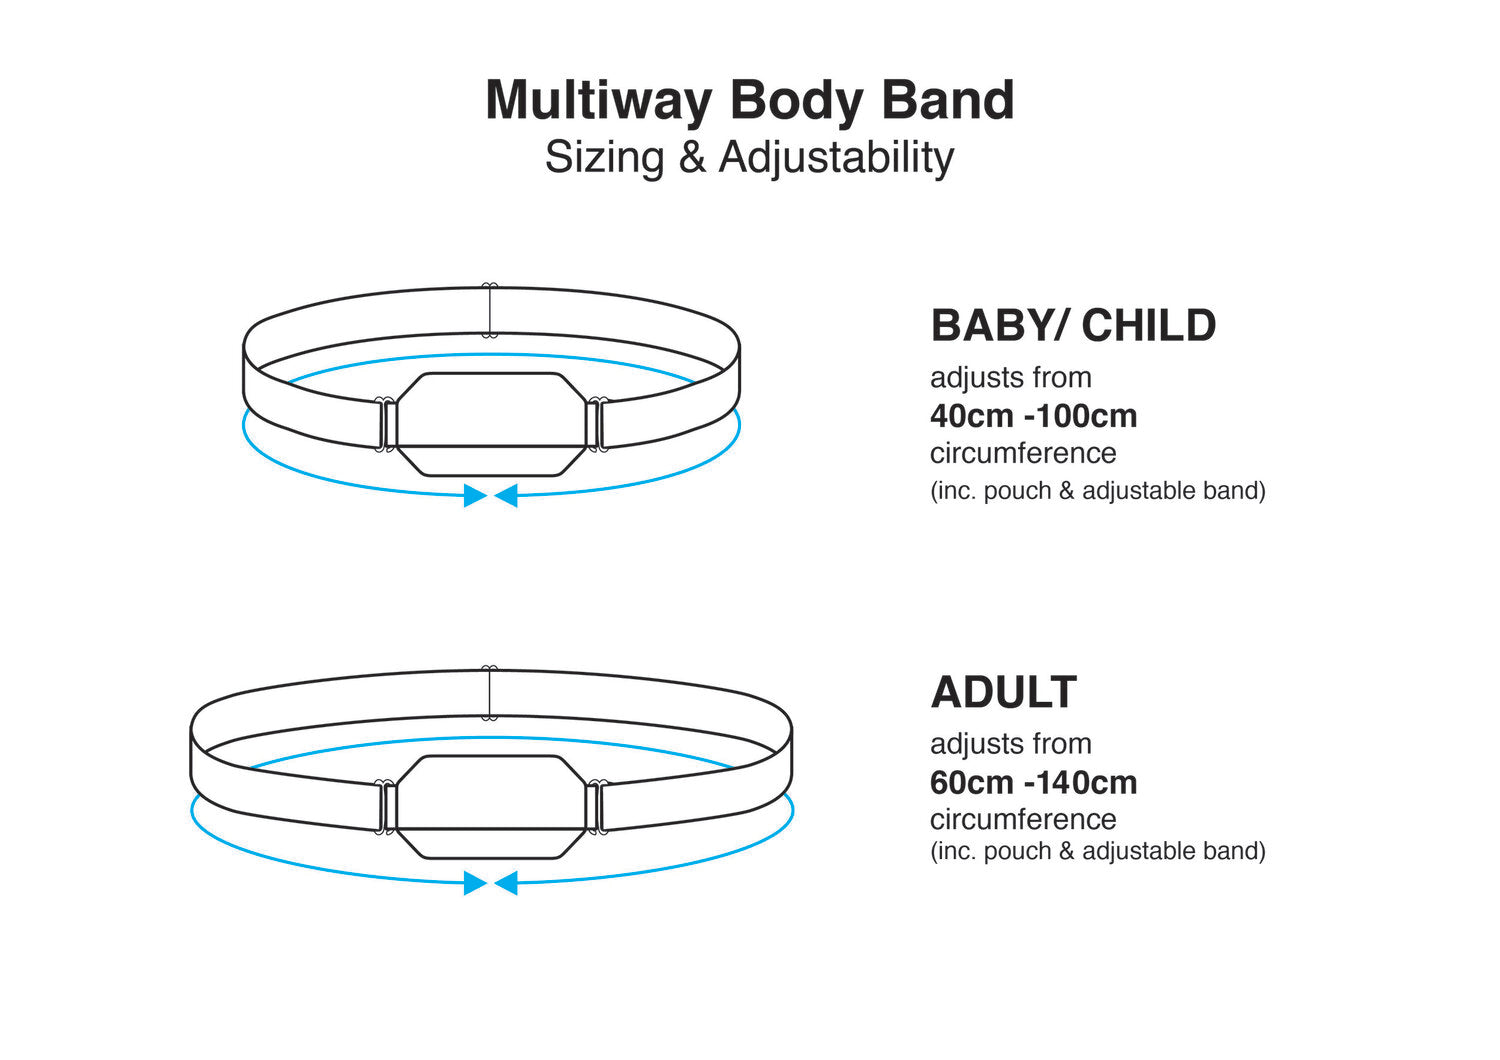 Hid-In Child Classic Multiway Body Band - White